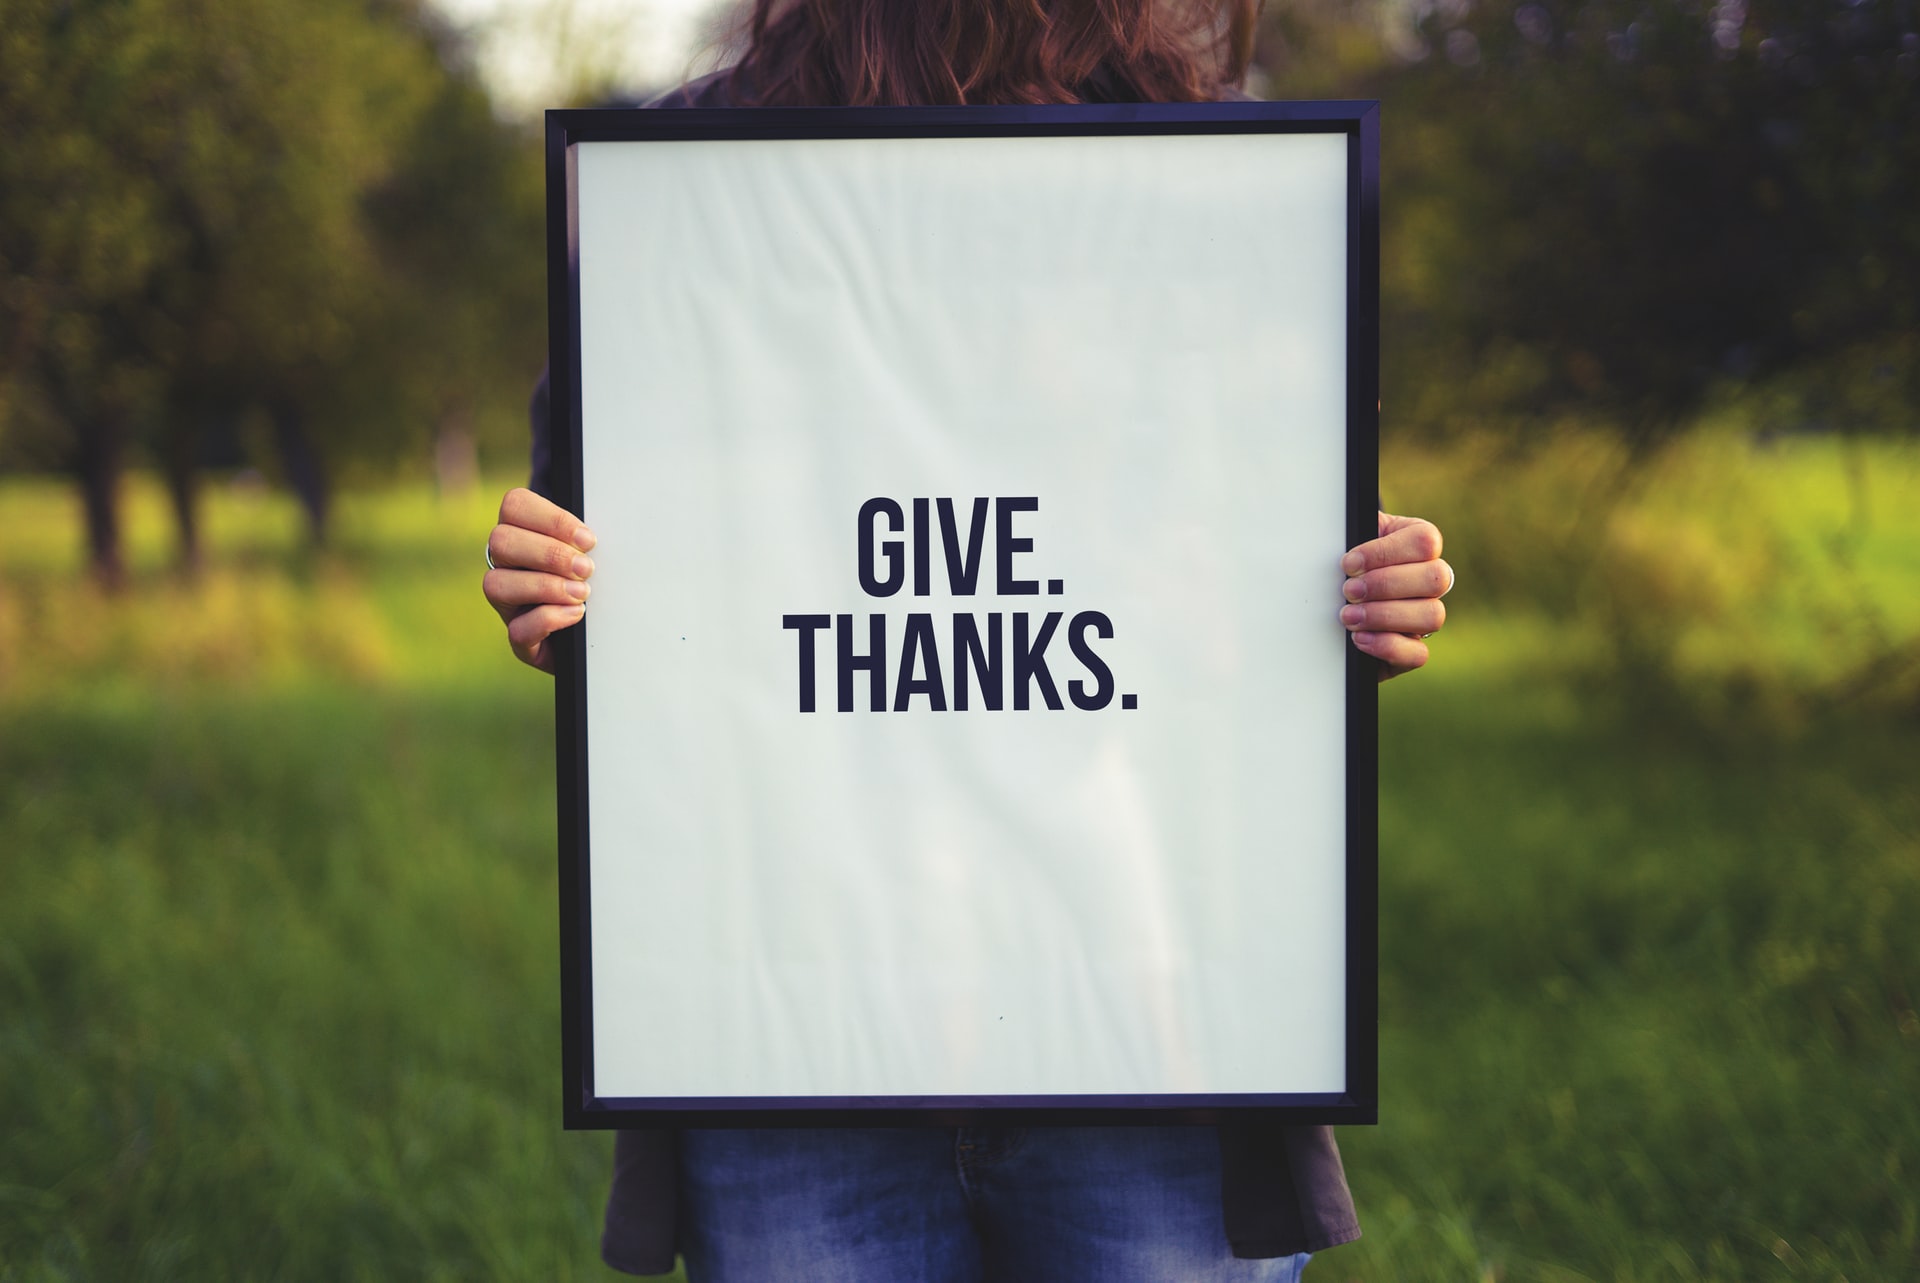 a person showing gratitude by holding a white sign saying, "Give Thanks." in a grassy field.